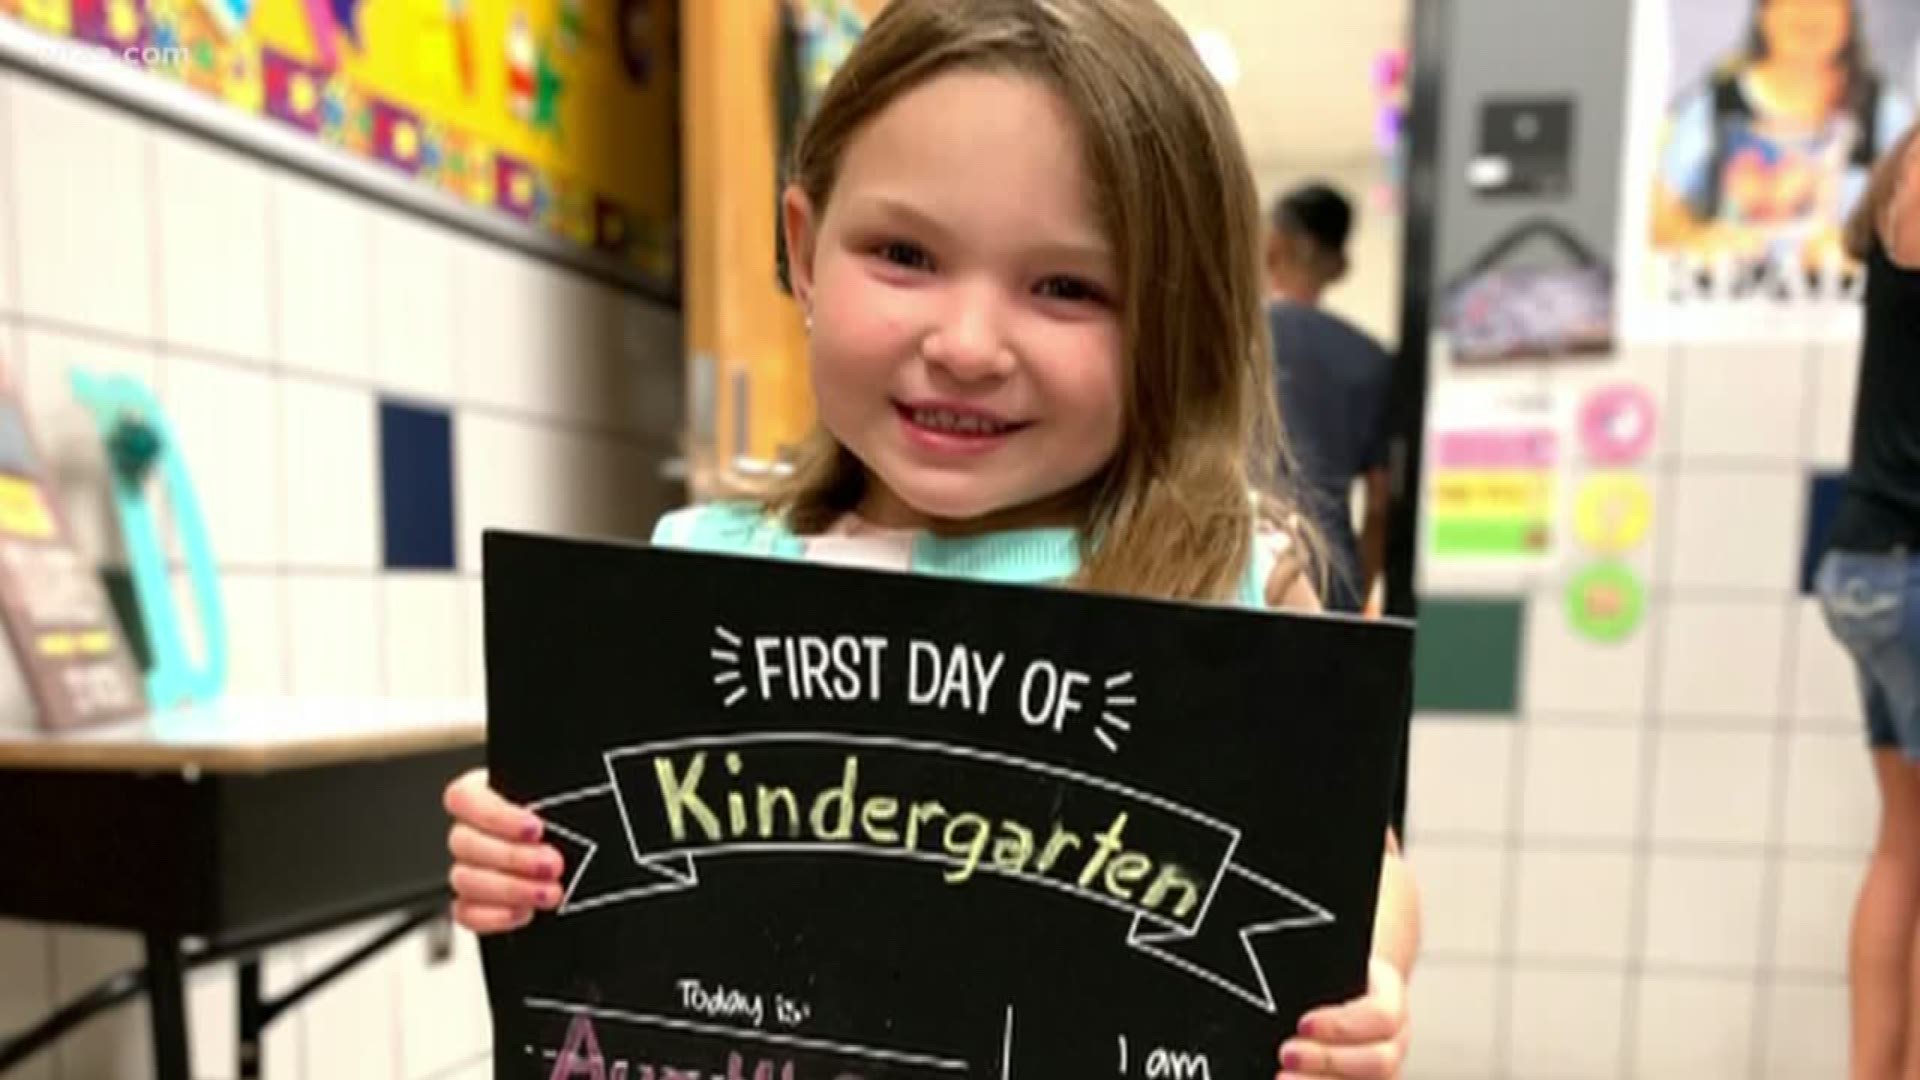 Back to school: Getting ready for the first day of kindergarten